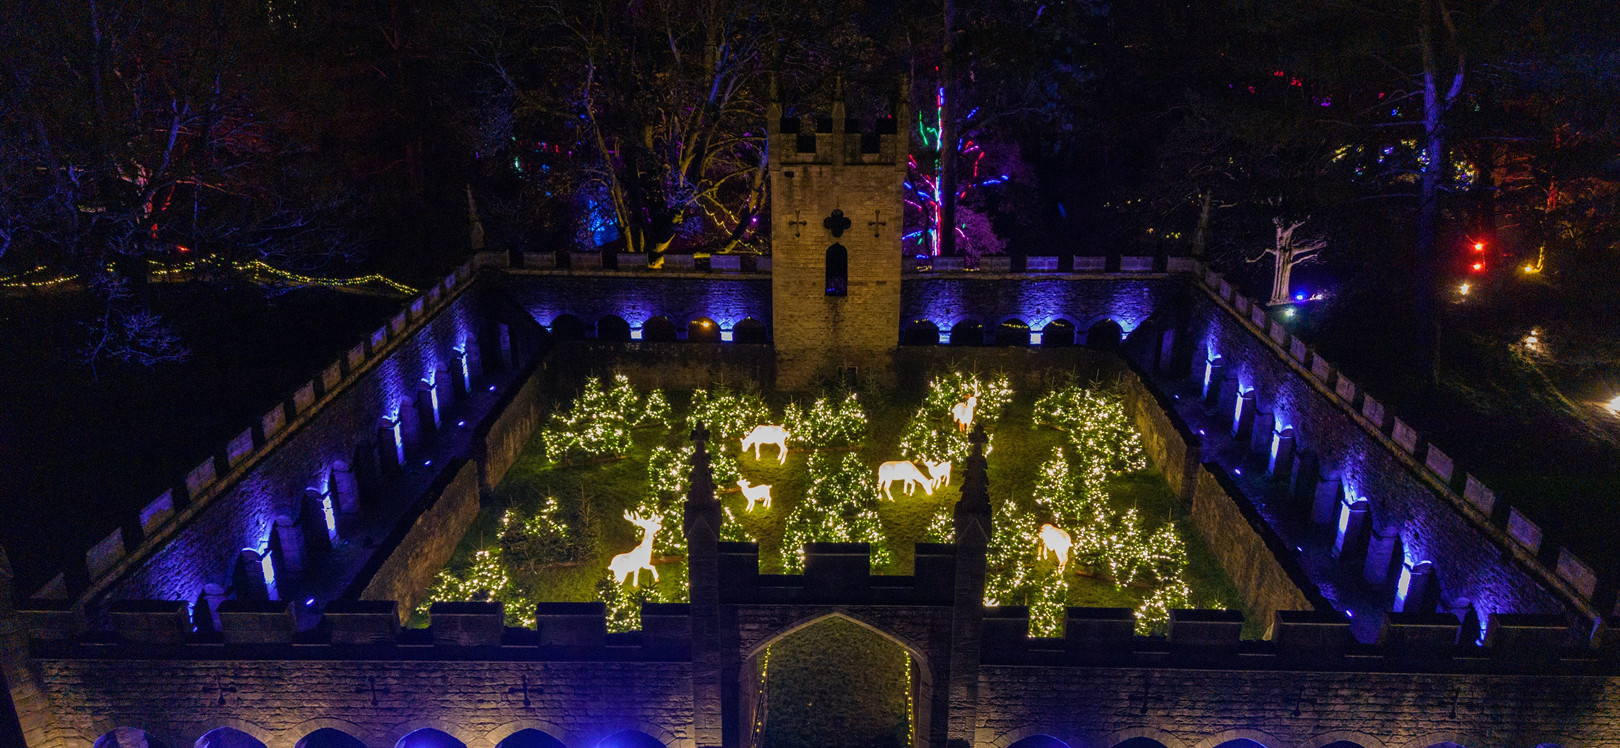 Duncan Lomax, Ravage Productions for AGLOW lit up castle and grounds